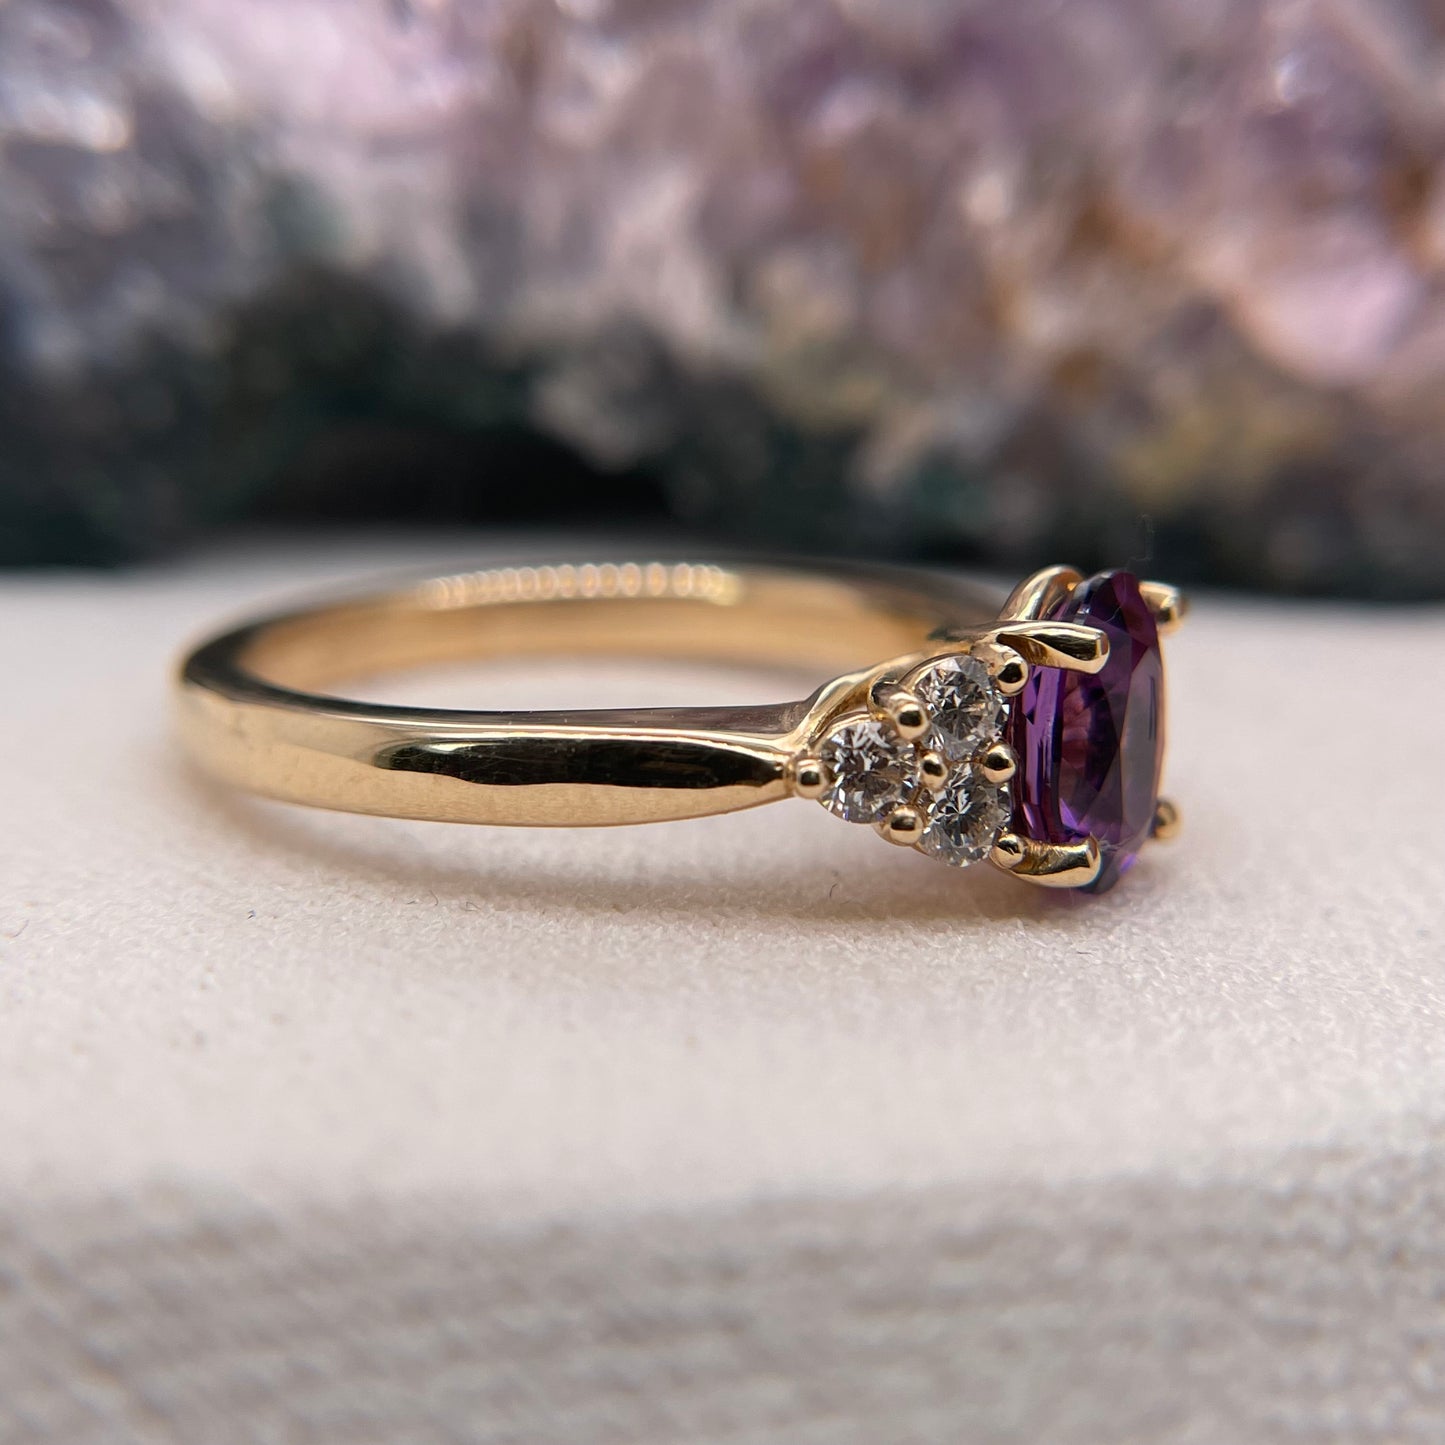 14K Yellow Gold Amethyst Ring with Diamond